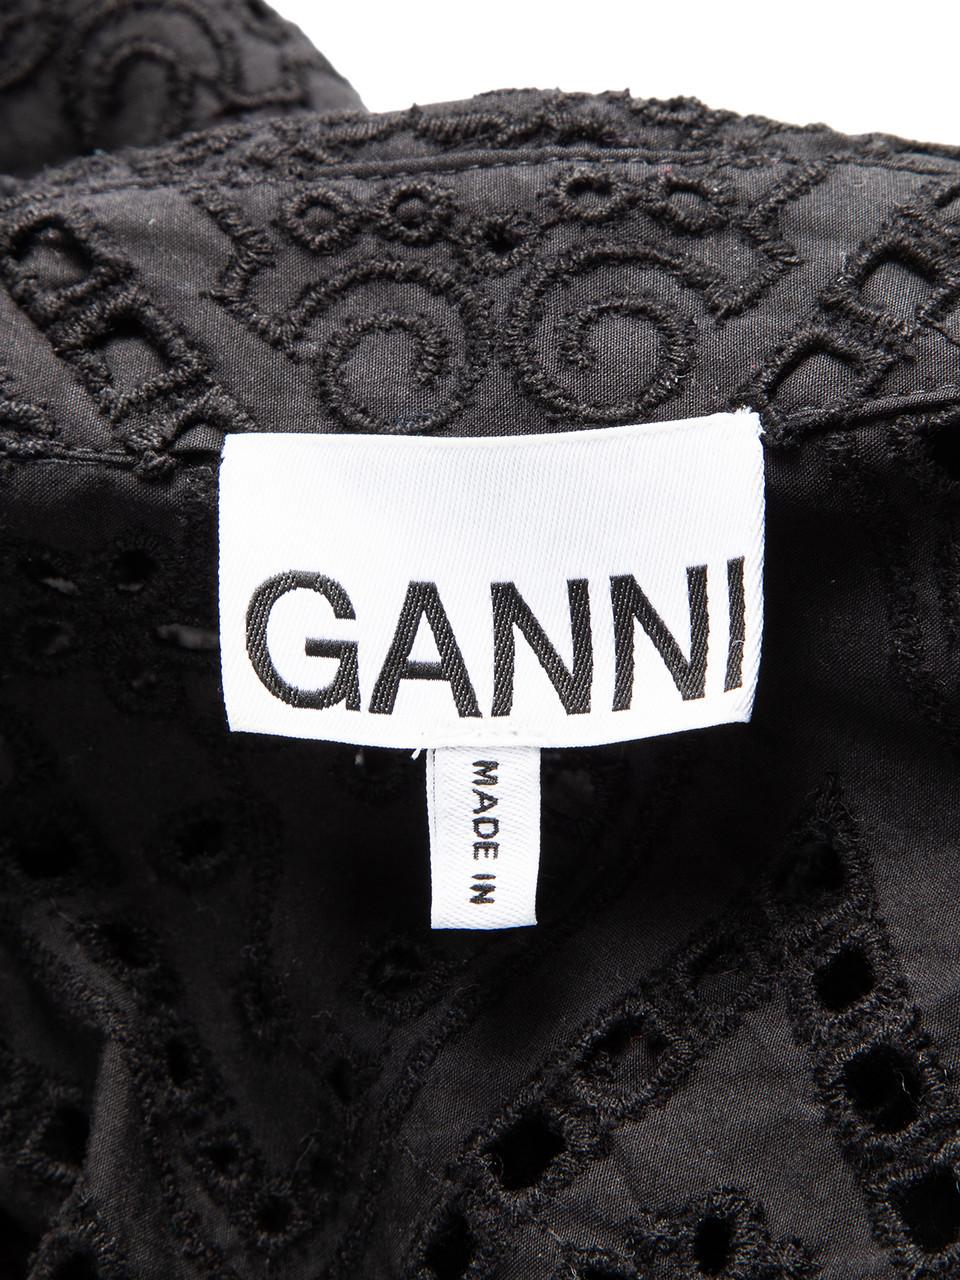 Ganni Women's Black Perforated Embroidered Shirt Dress 2